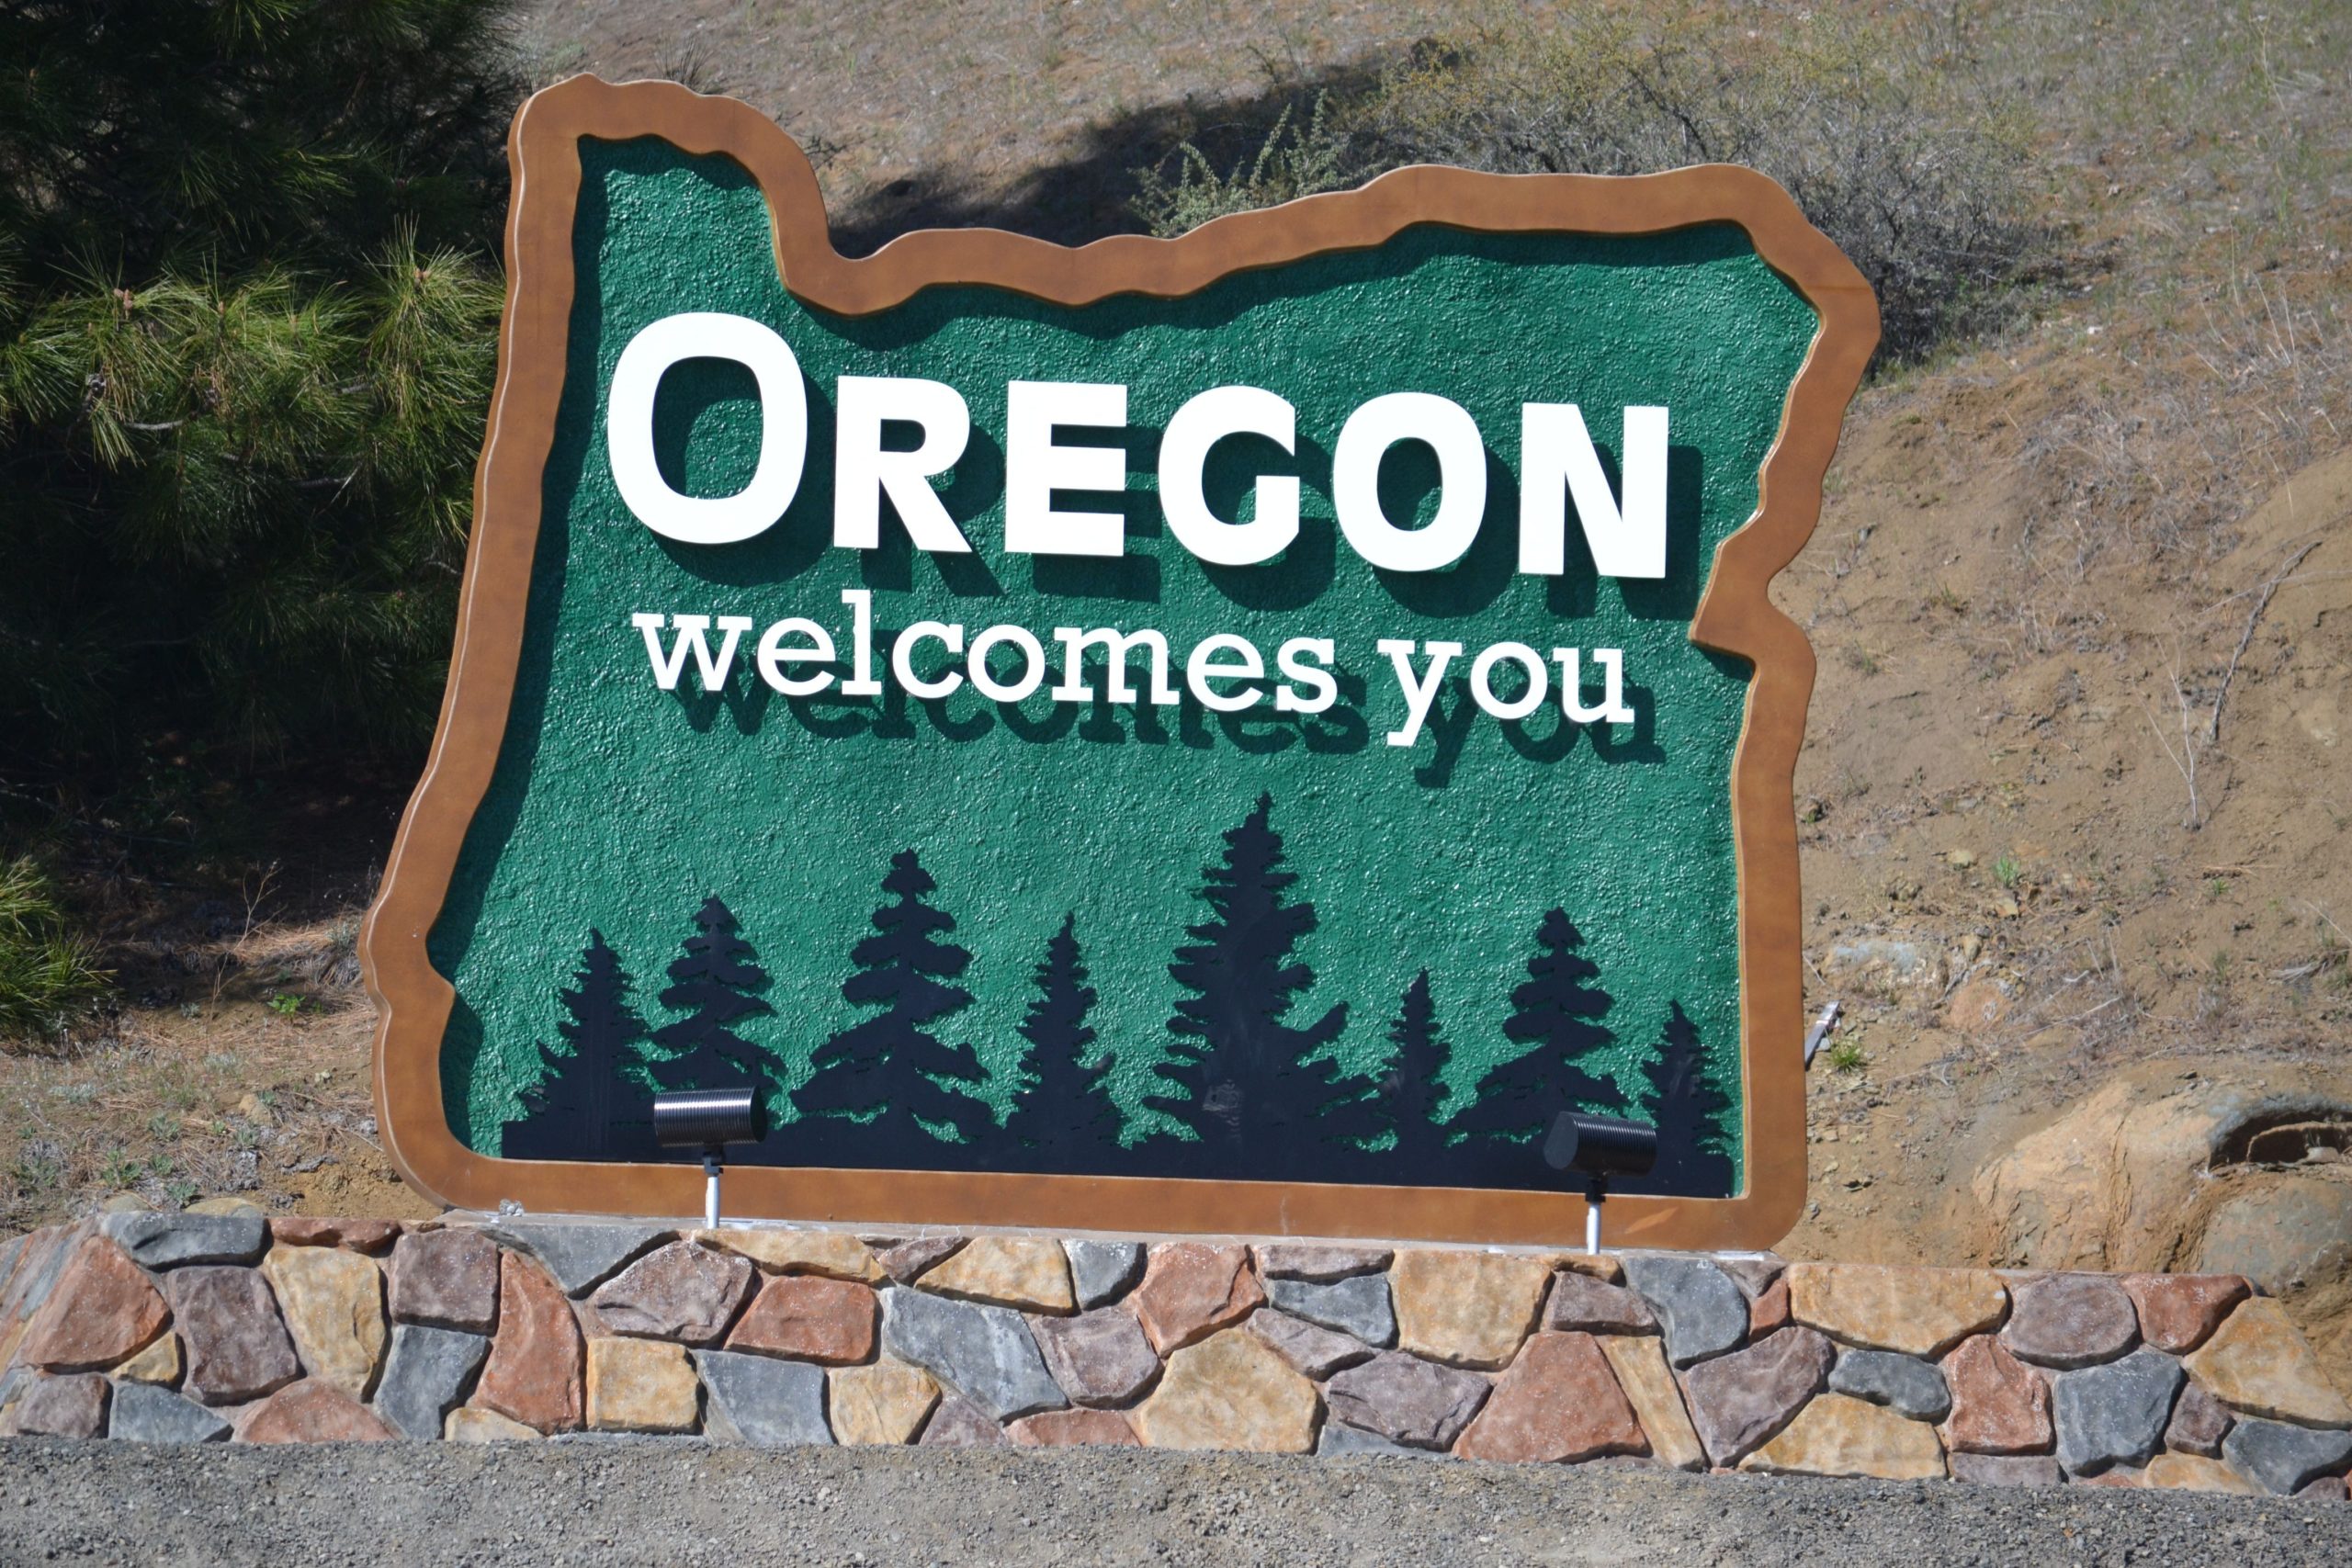 How To Sell A Car in Oregon And Follow All State Guidelines